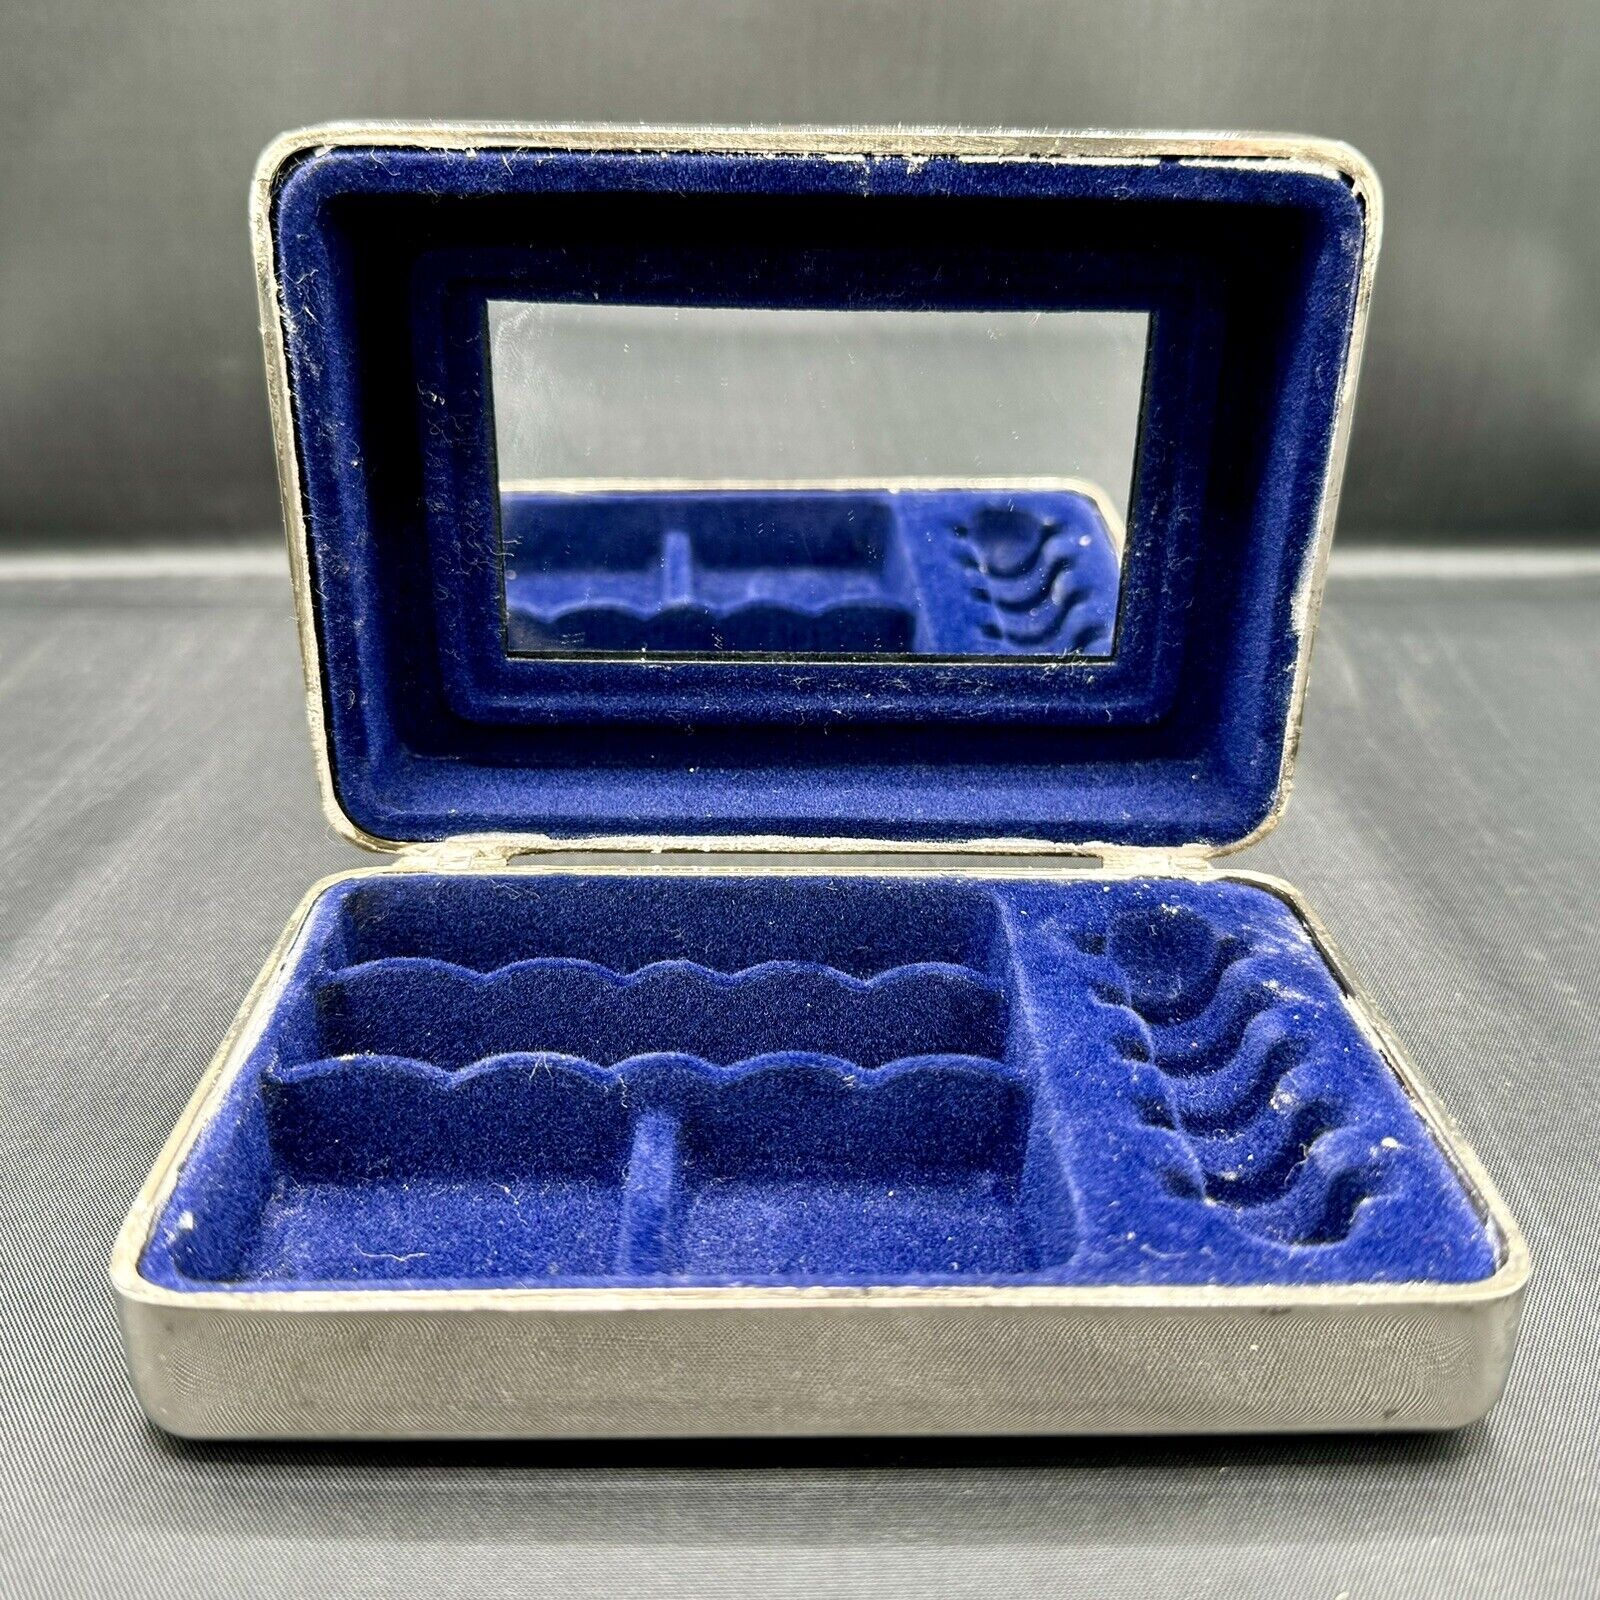 Vintage Silver Plated Jewelry Trinket Box With Blue Lining And Mirror